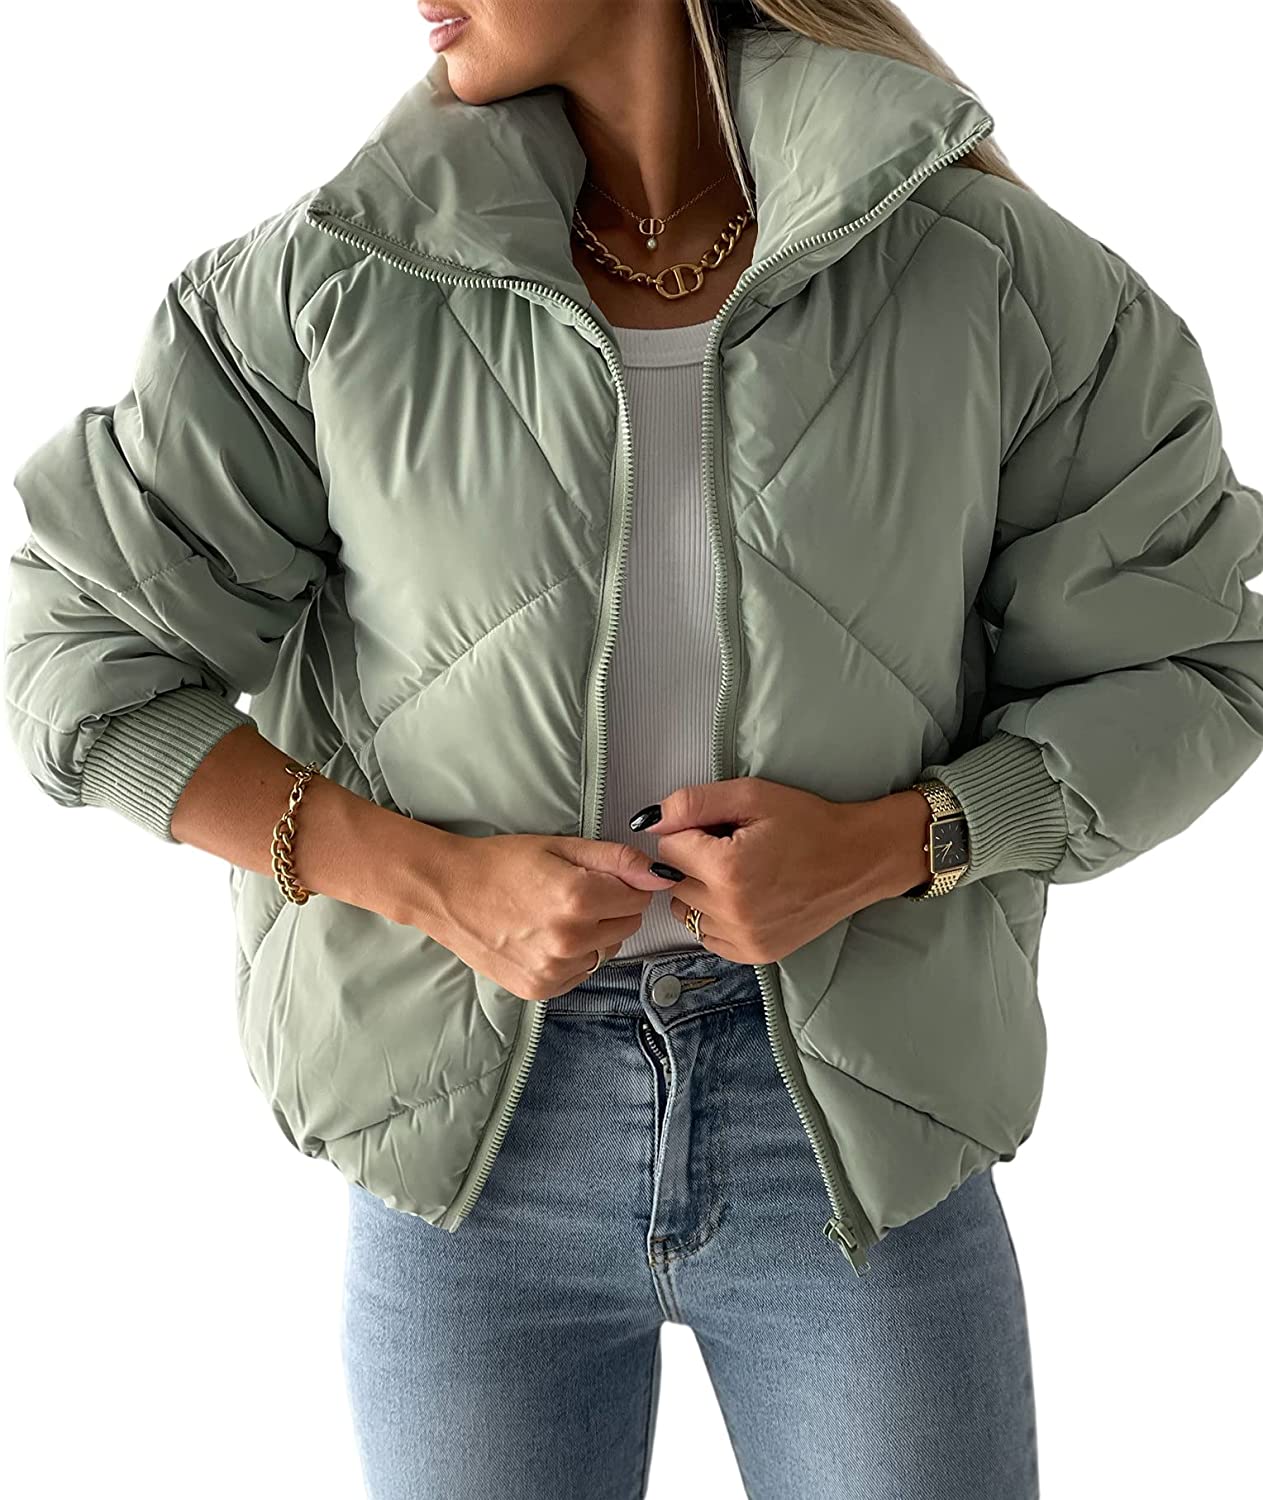 Newffr Womens Quilted Cropped Puffer Jacket Long Sleeve Full